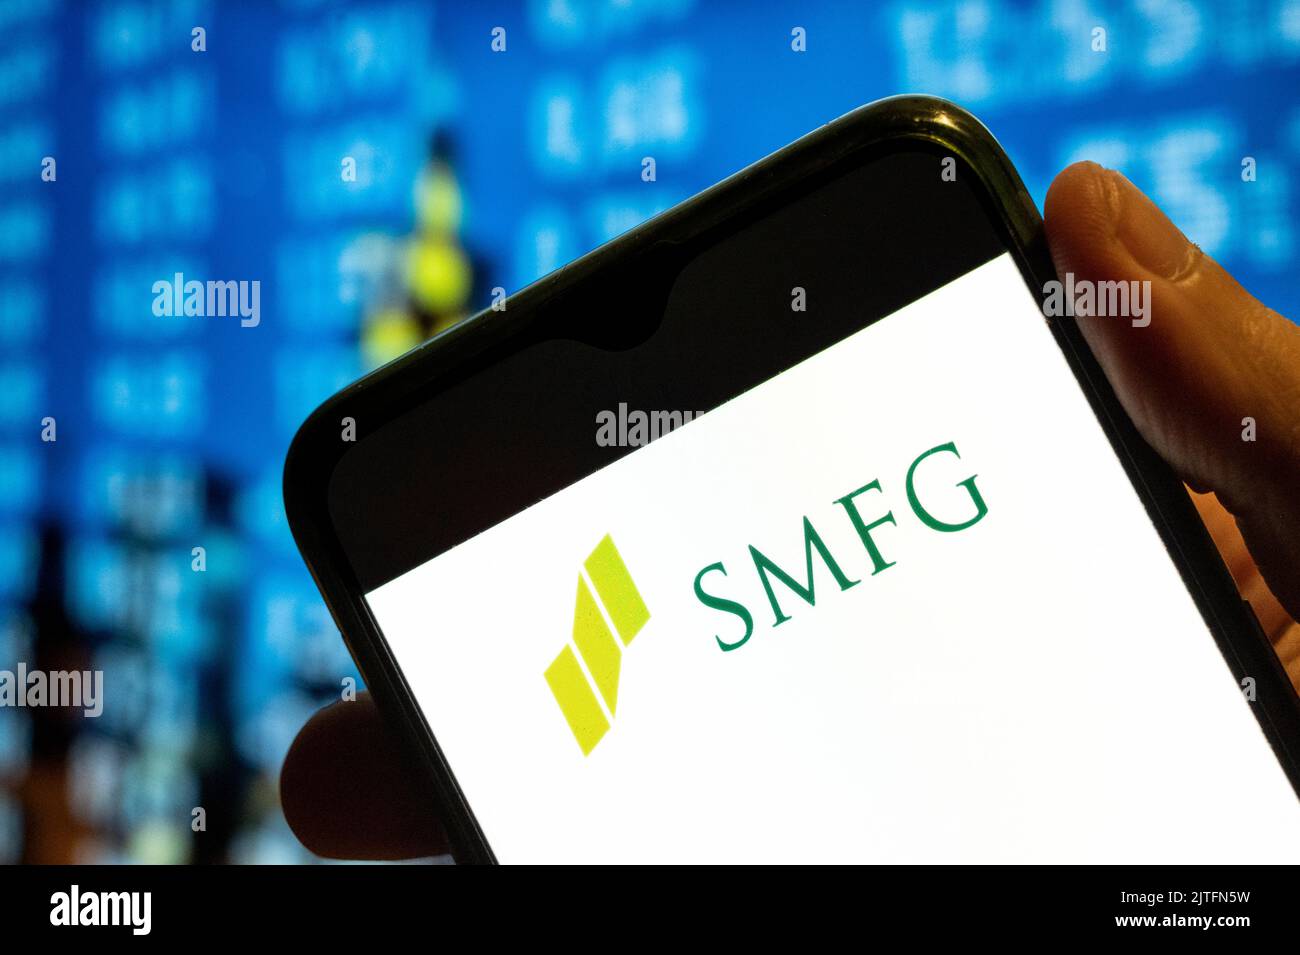 In this photo illustration, the Japanese multinational banking and financial company Sumitomo Mitsui Financial Group SMFG logo is displayed on a smartphone screen. Stock Photo